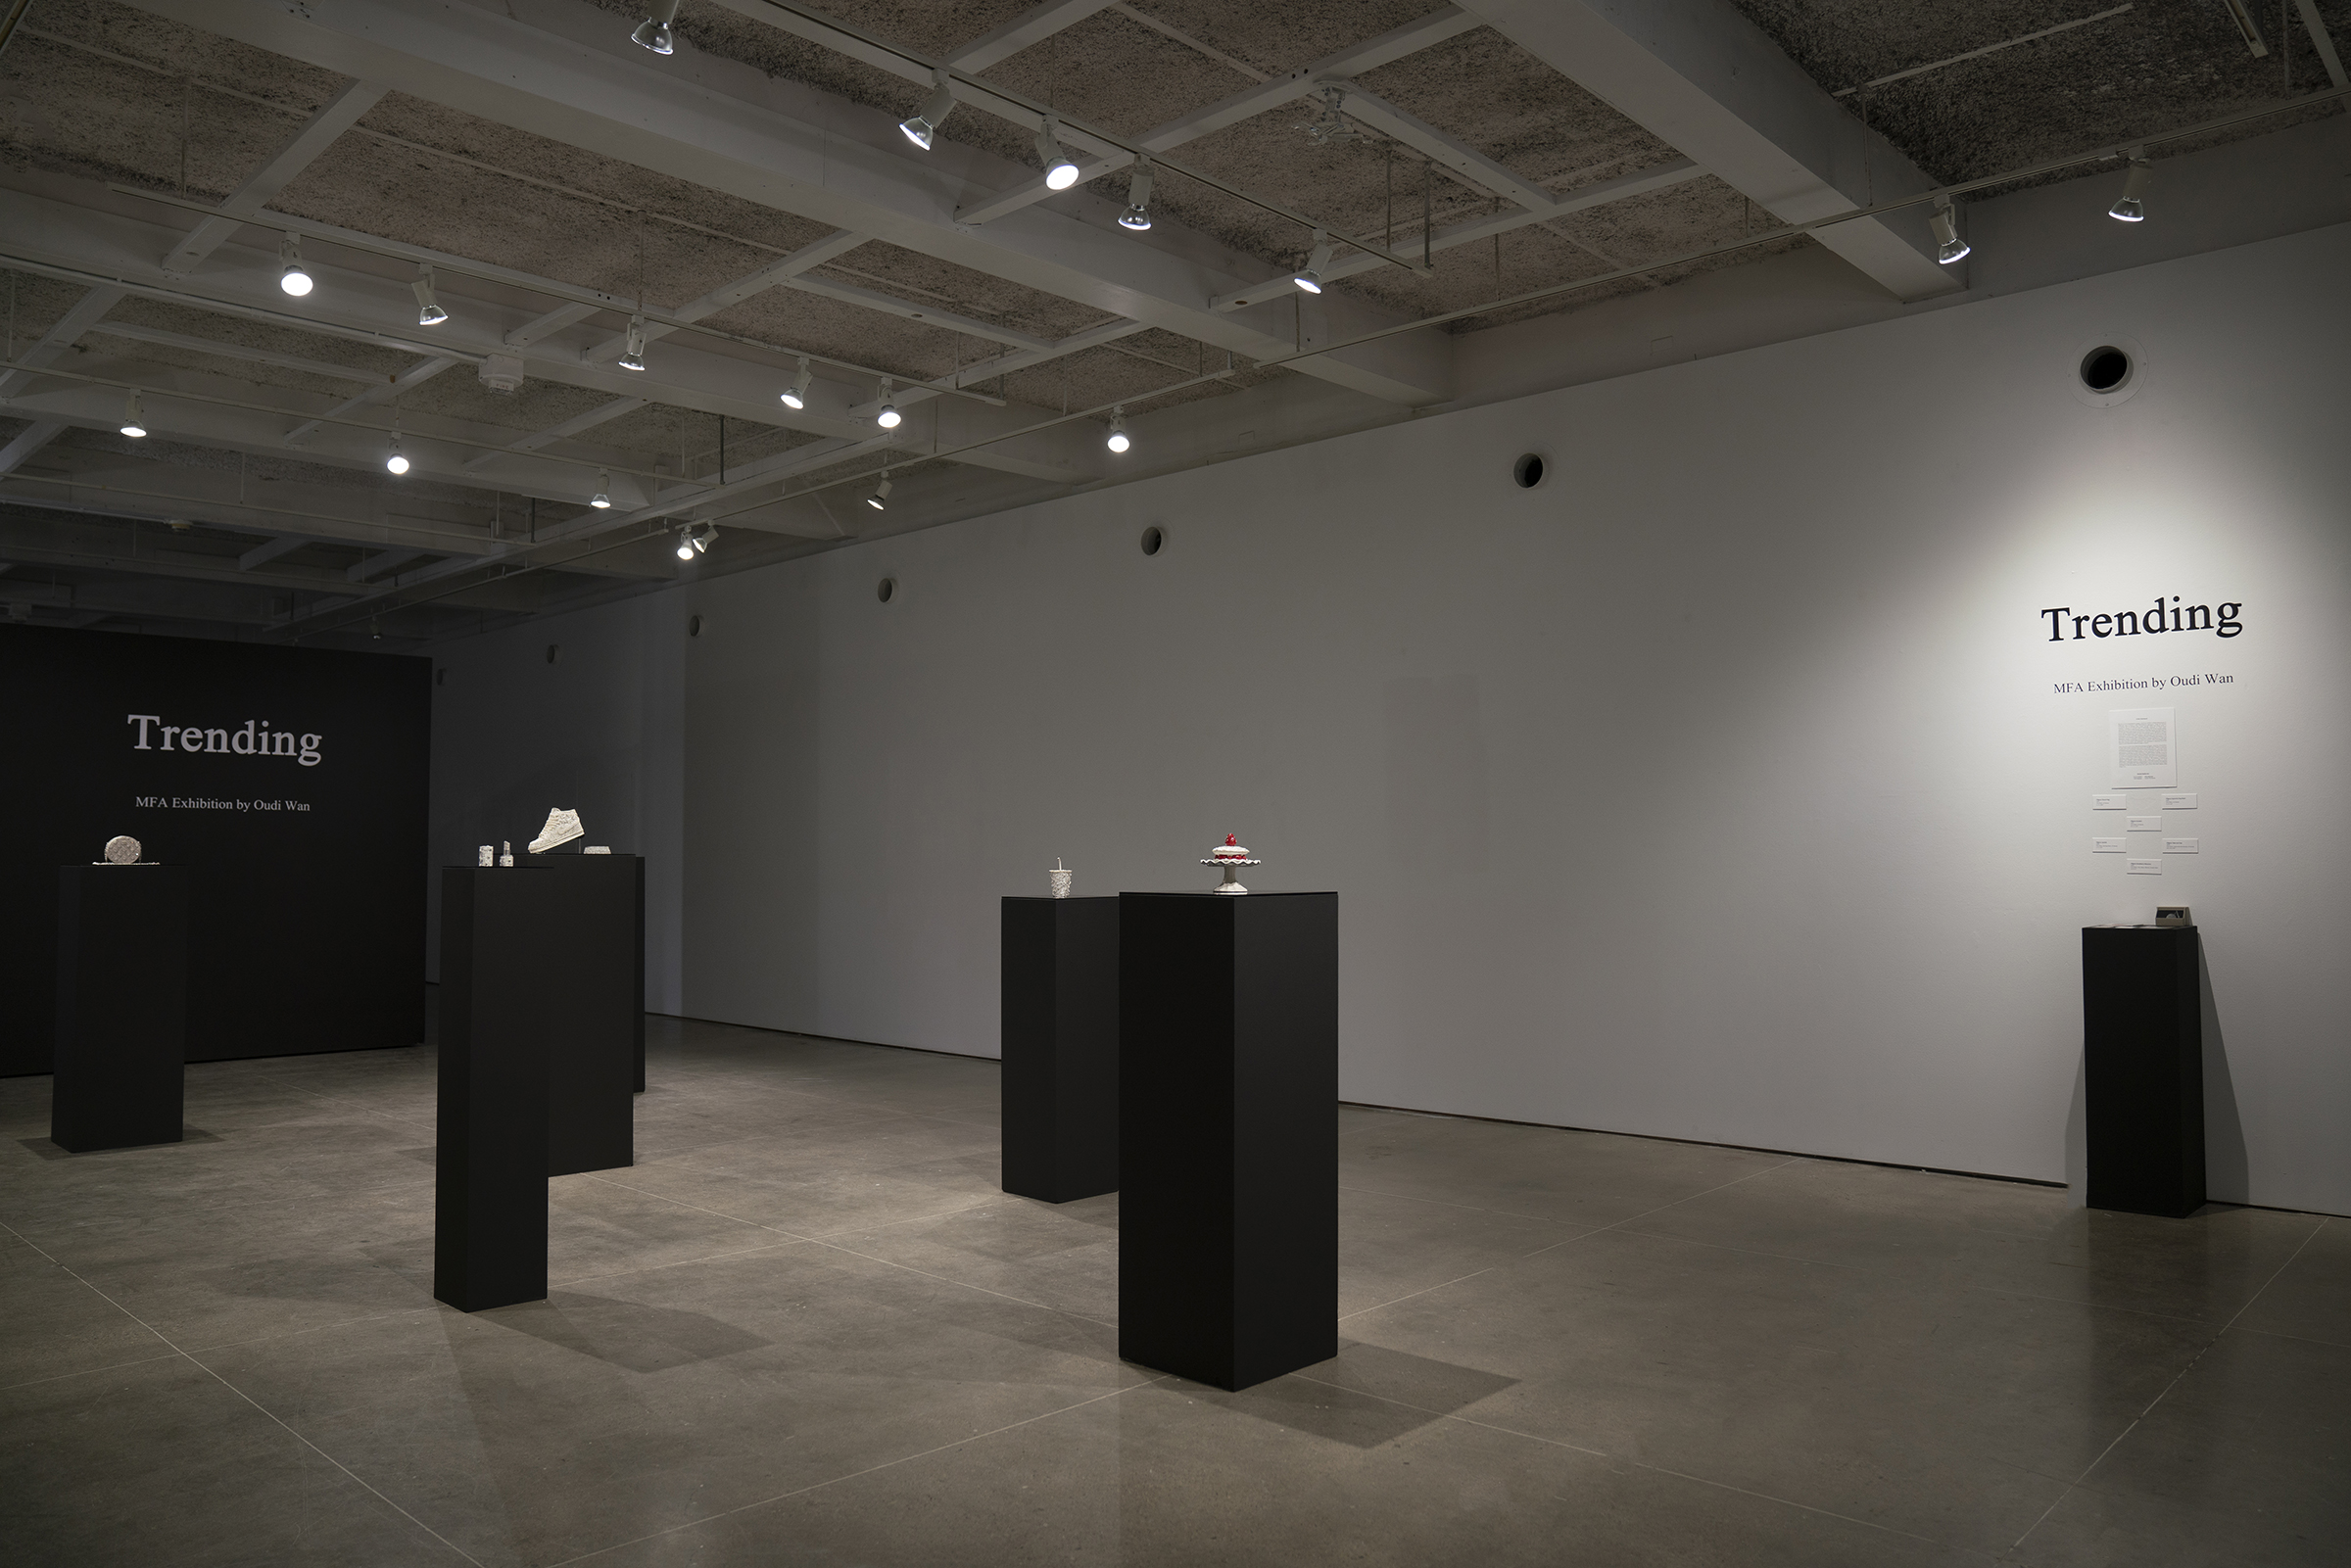 Installation view of Trending Master of Fine Arts Exhibition by Oudi Wan at Gallery 7, Humanities Building, University of Wisconsin-Madison.